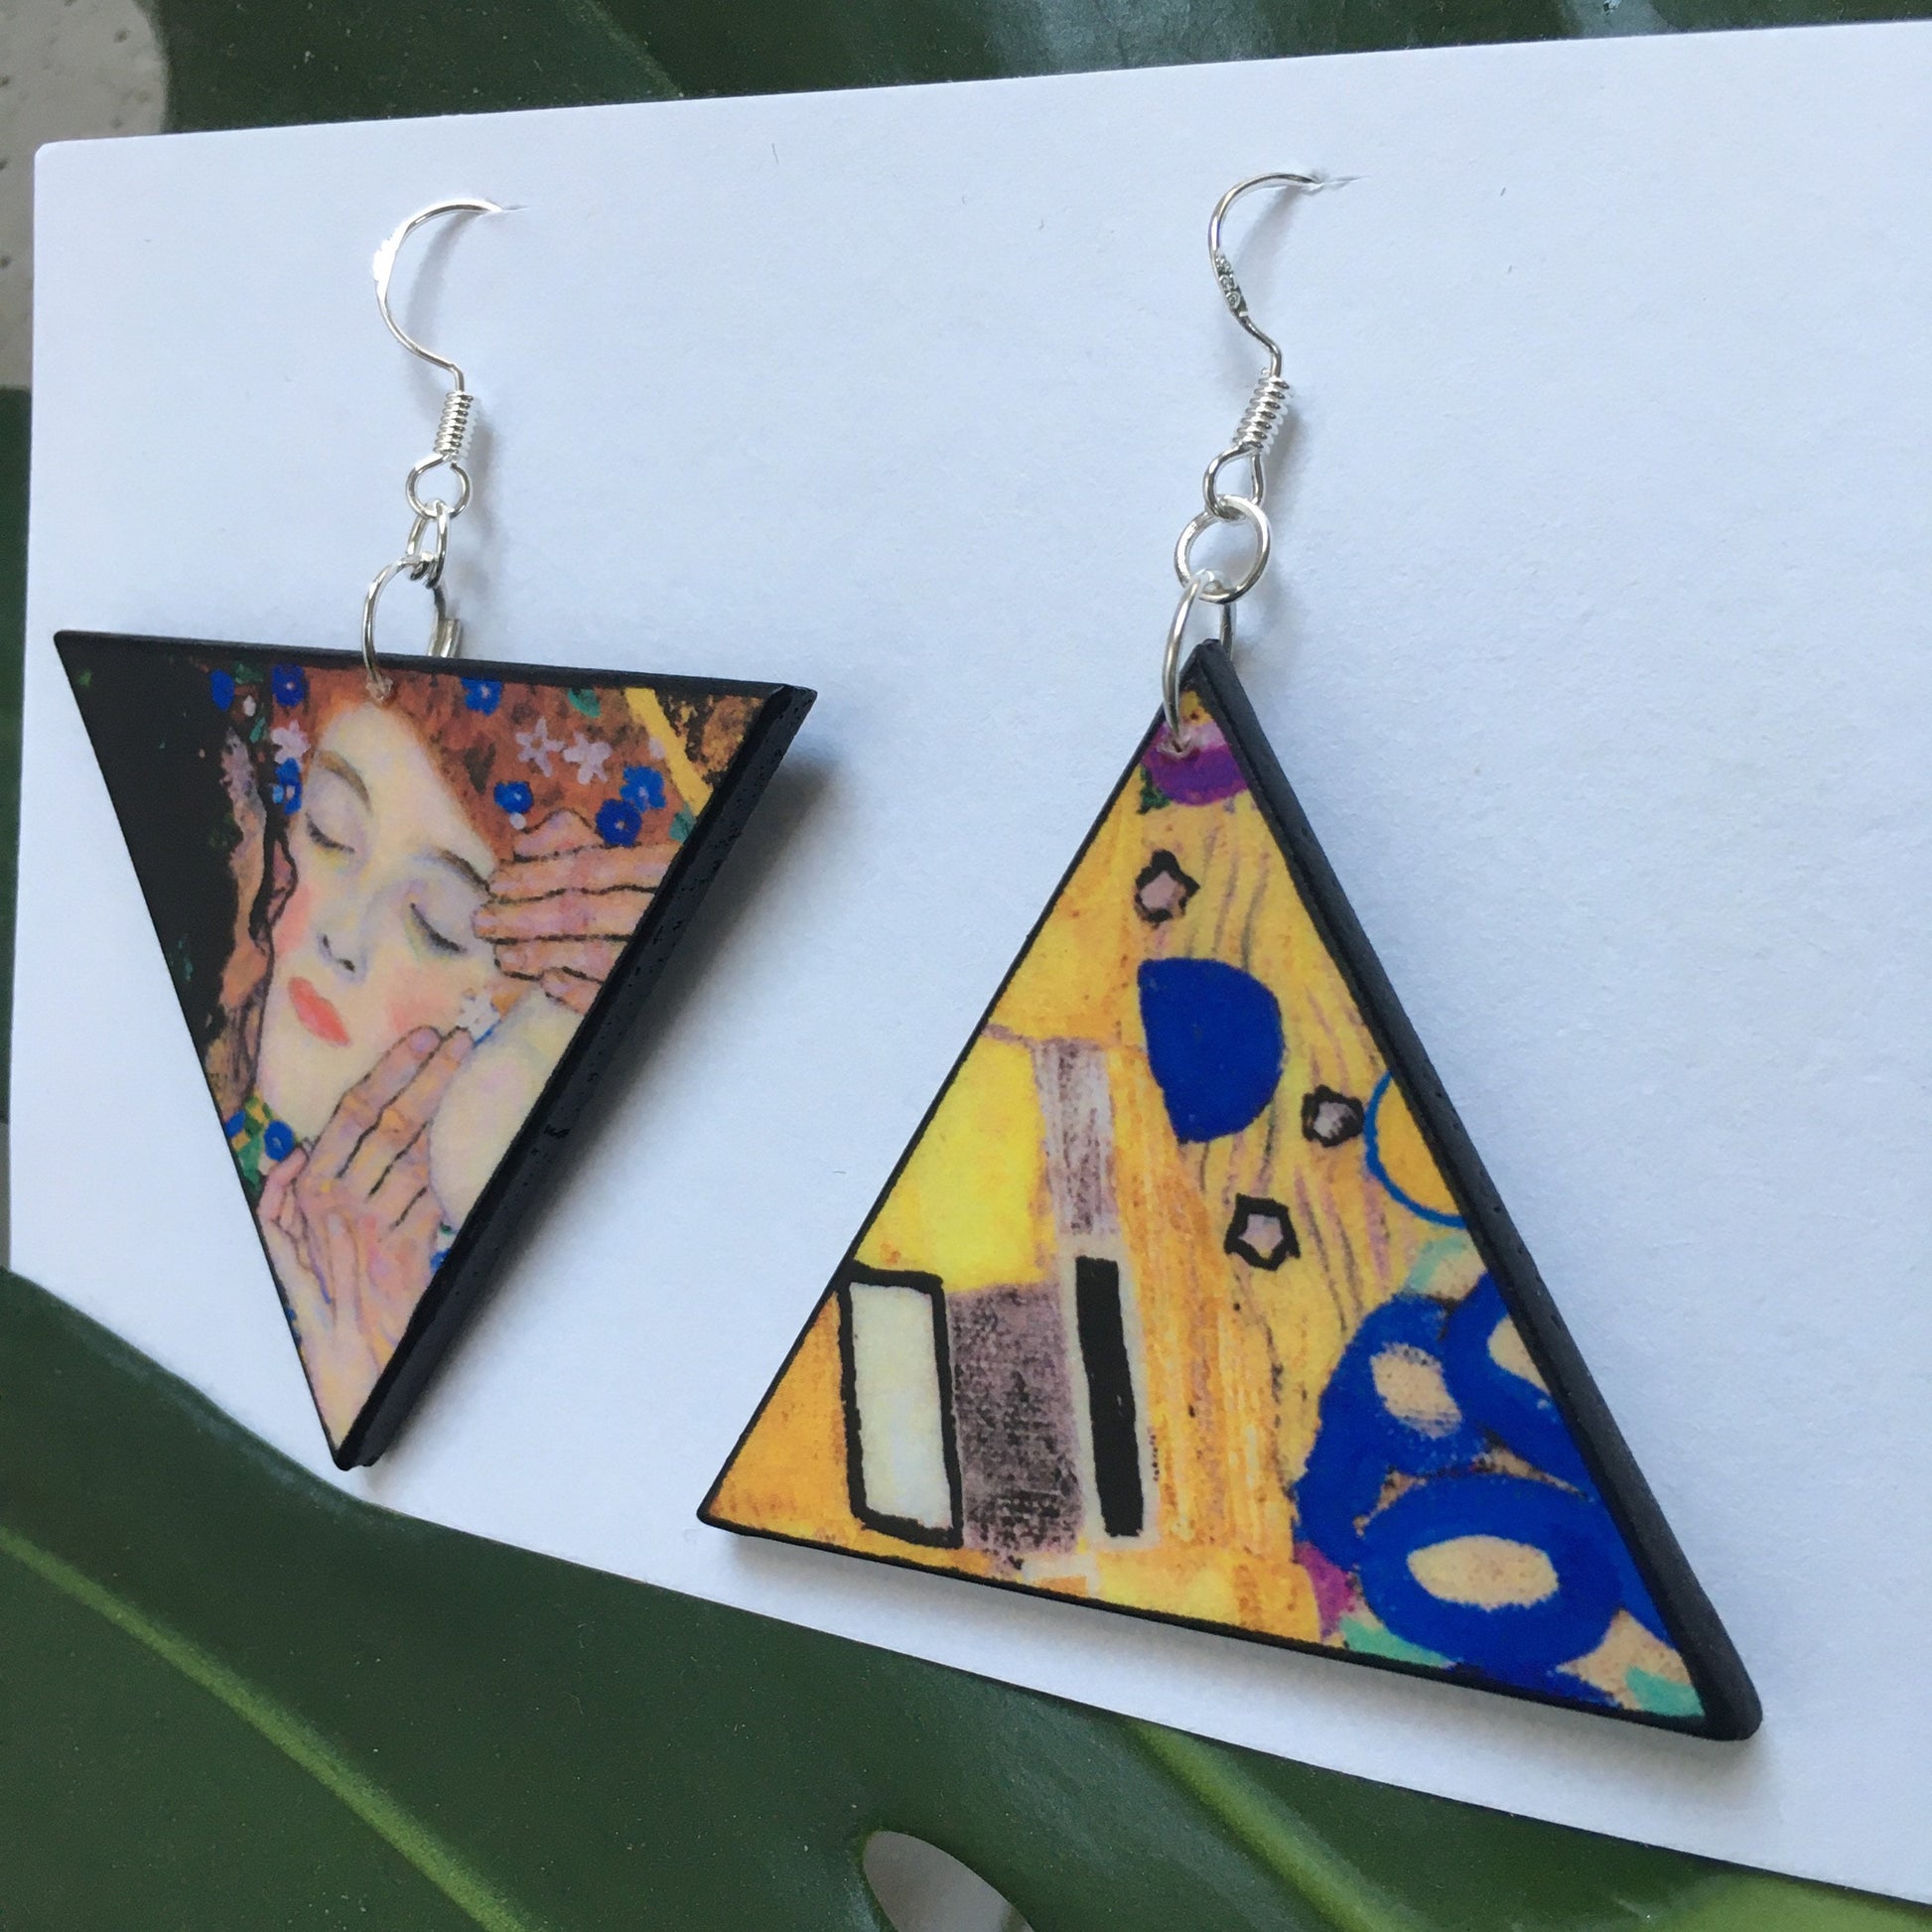 Obljewellery Earrings inspired by Gustav Klimt and his painting The Kiss to create these  triangular, earrings on wood with silver hooks.